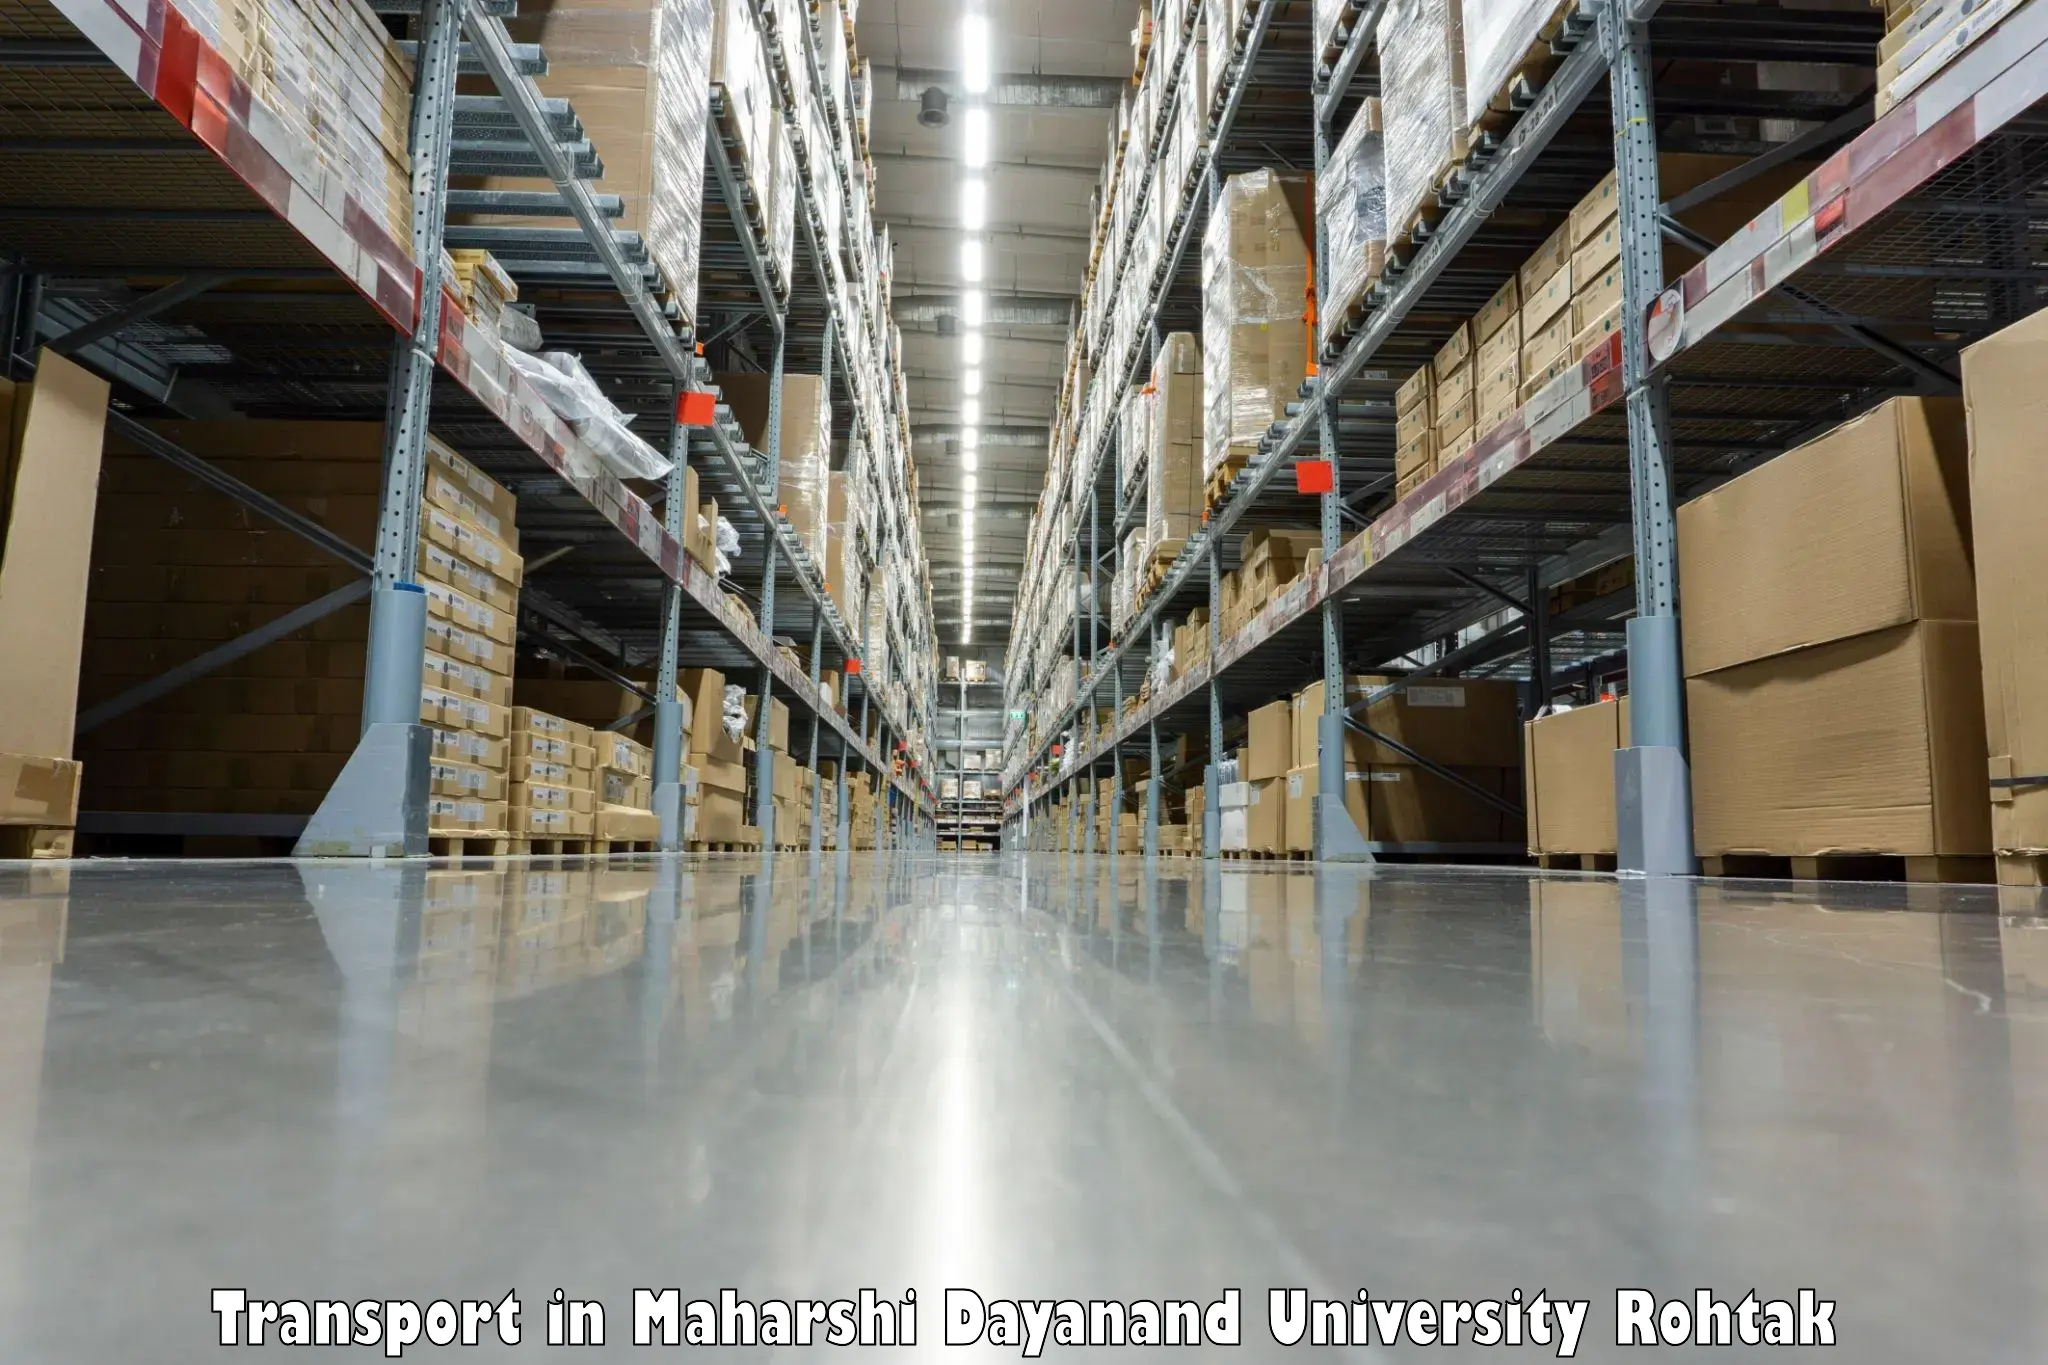 Inland transportation services in Maharshi Dayanand University Rohtak